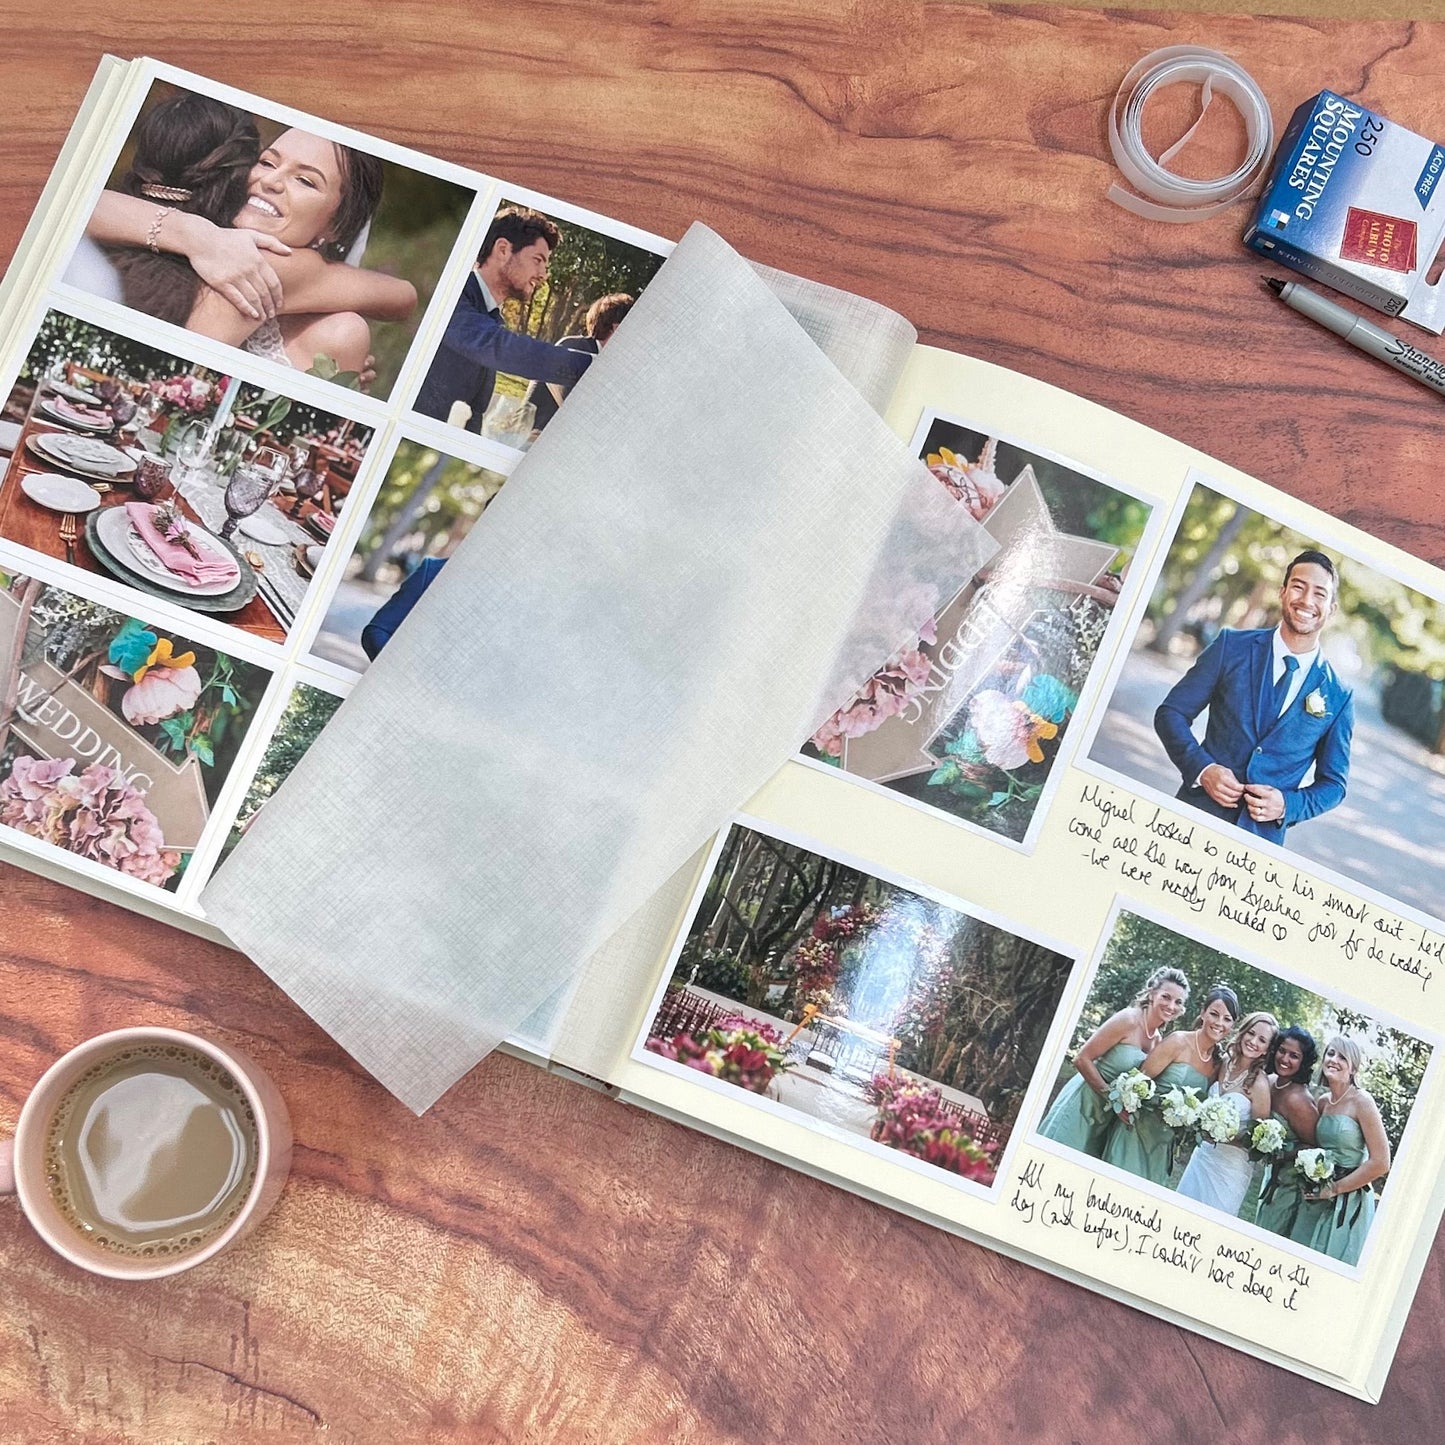 on a wooden table is a large photo album which is opened so that you can see how all the photos look when they are arranged on to the pages